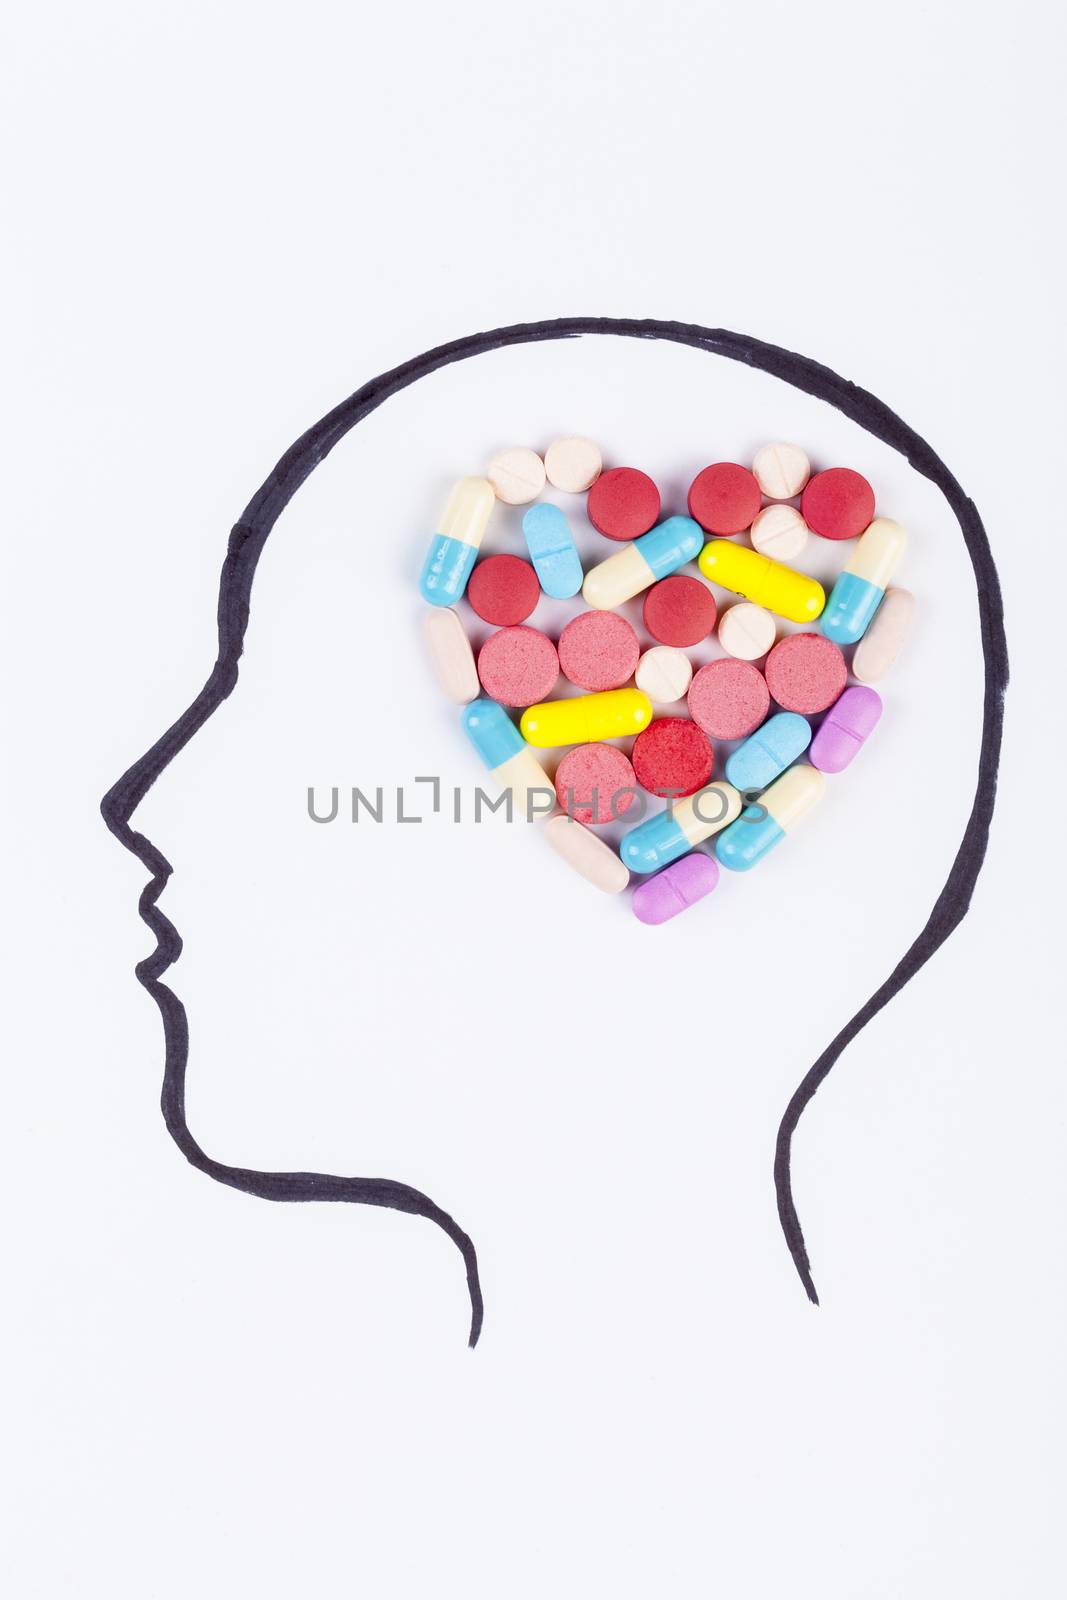 Human head hand drawing with heart shape colored pills in the brain